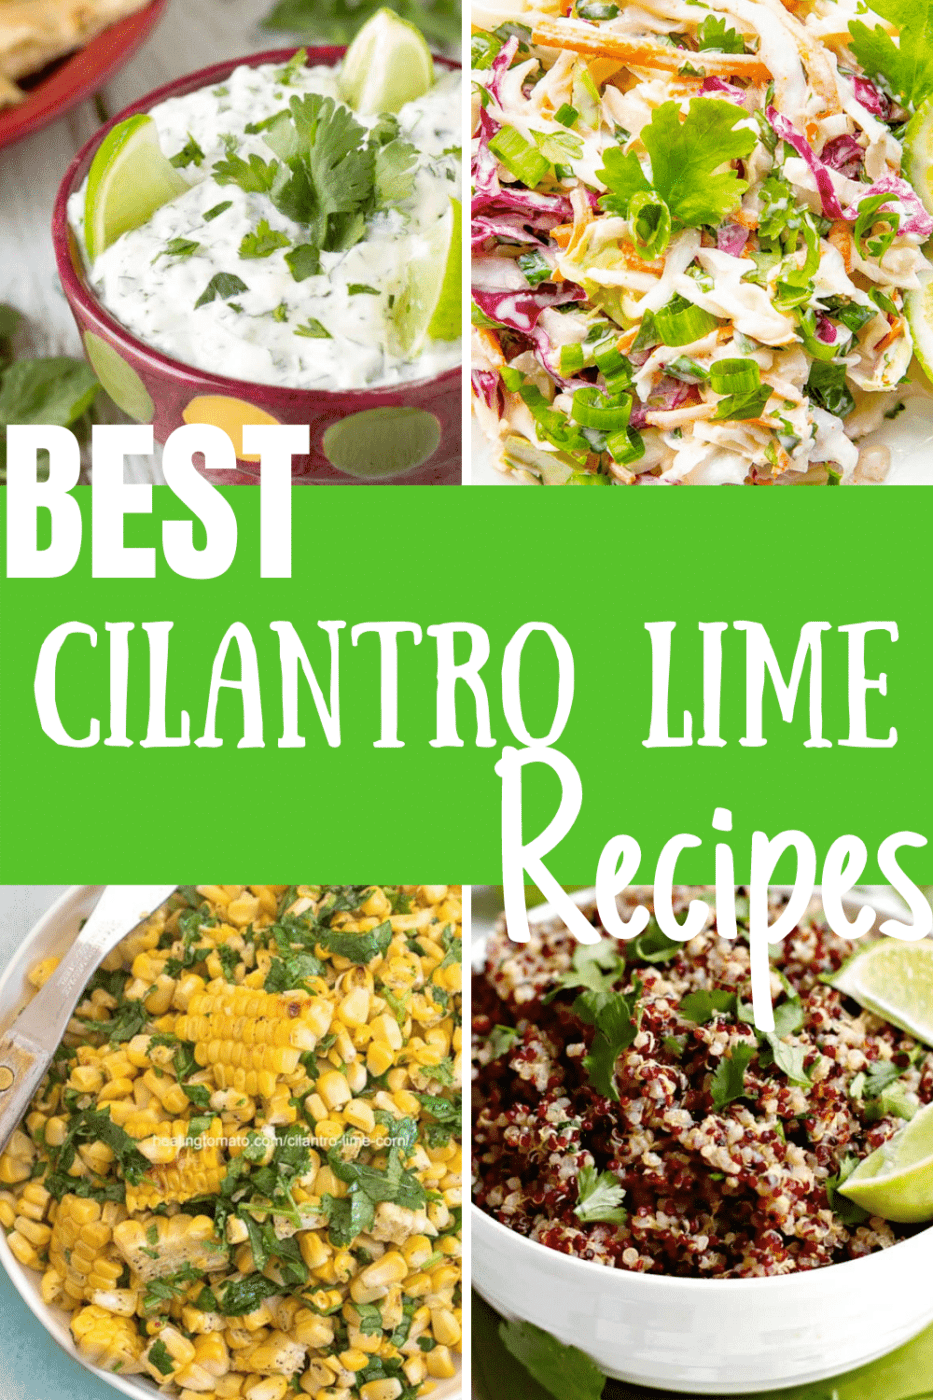 A collage of 4 images arranged in a grid and the words "BEST Cilantro Lime Recipes" printed on top